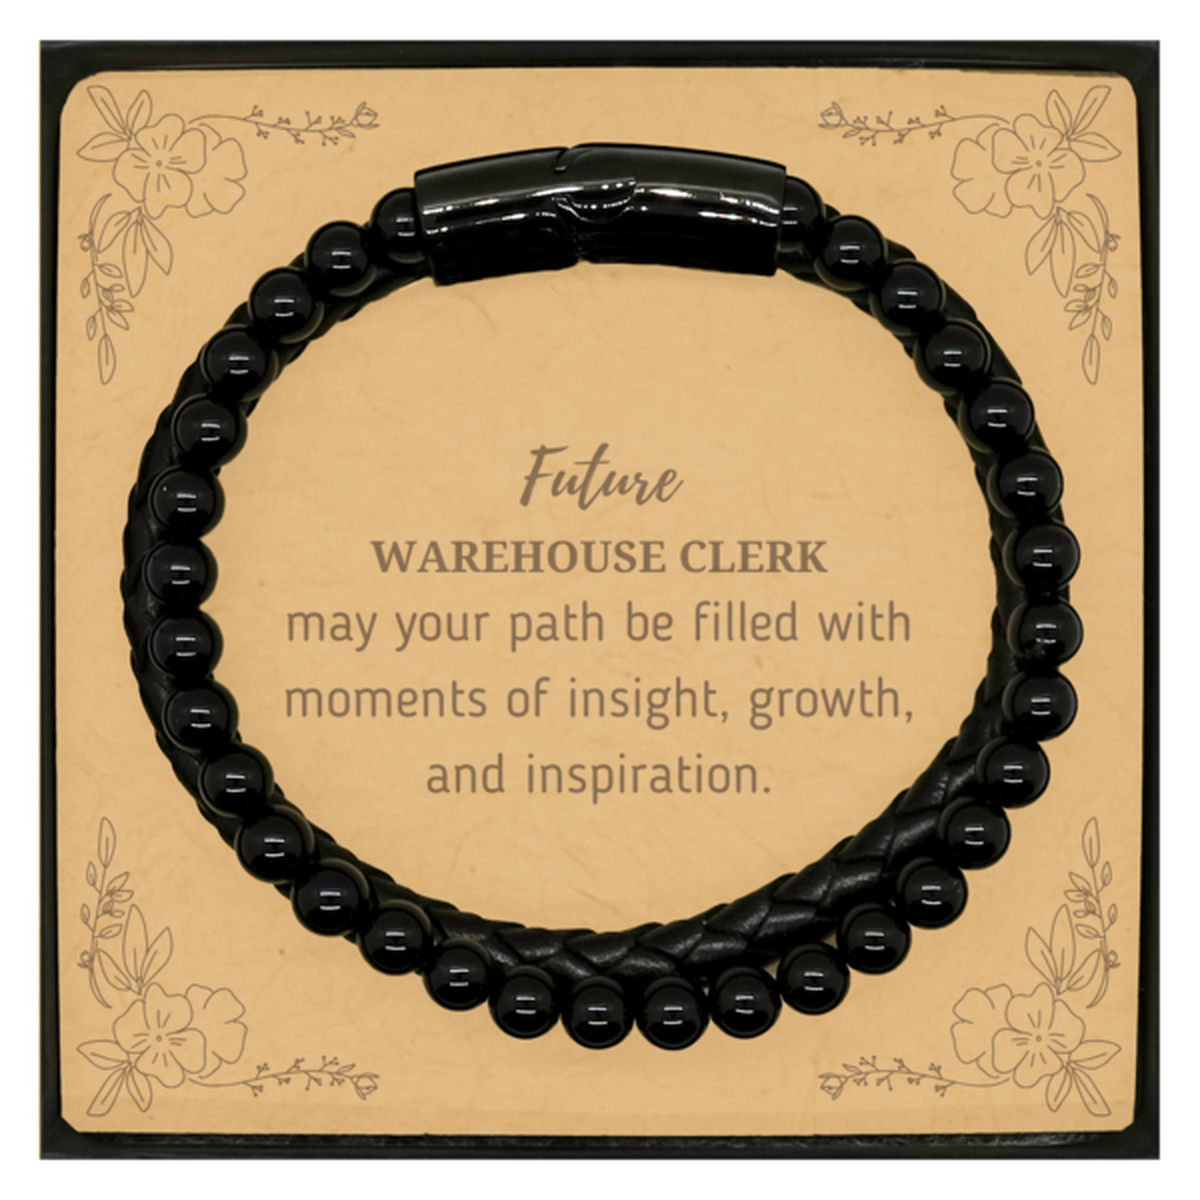 Future Warehouse Clerk Gifts, May your path be filled with moments of insight, Graduation Gifts for New Warehouse Clerk, Christmas Unique Stone Leather Bracelets For Men, Women, Friends